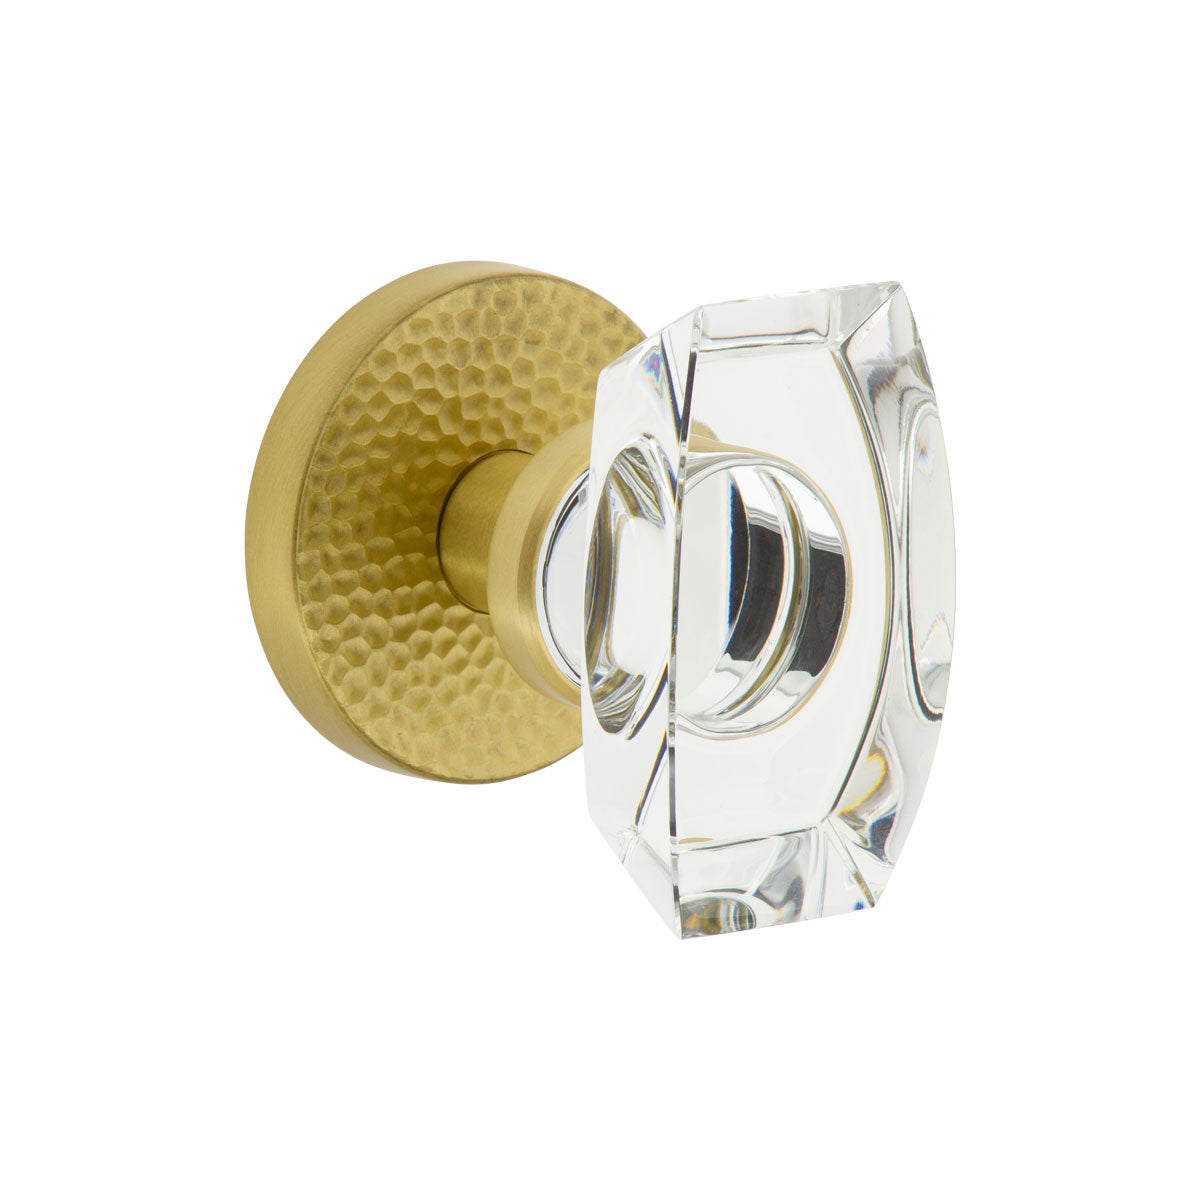 Circolo Hammered Rosette with Stella Crystal Knob in Satin Brass